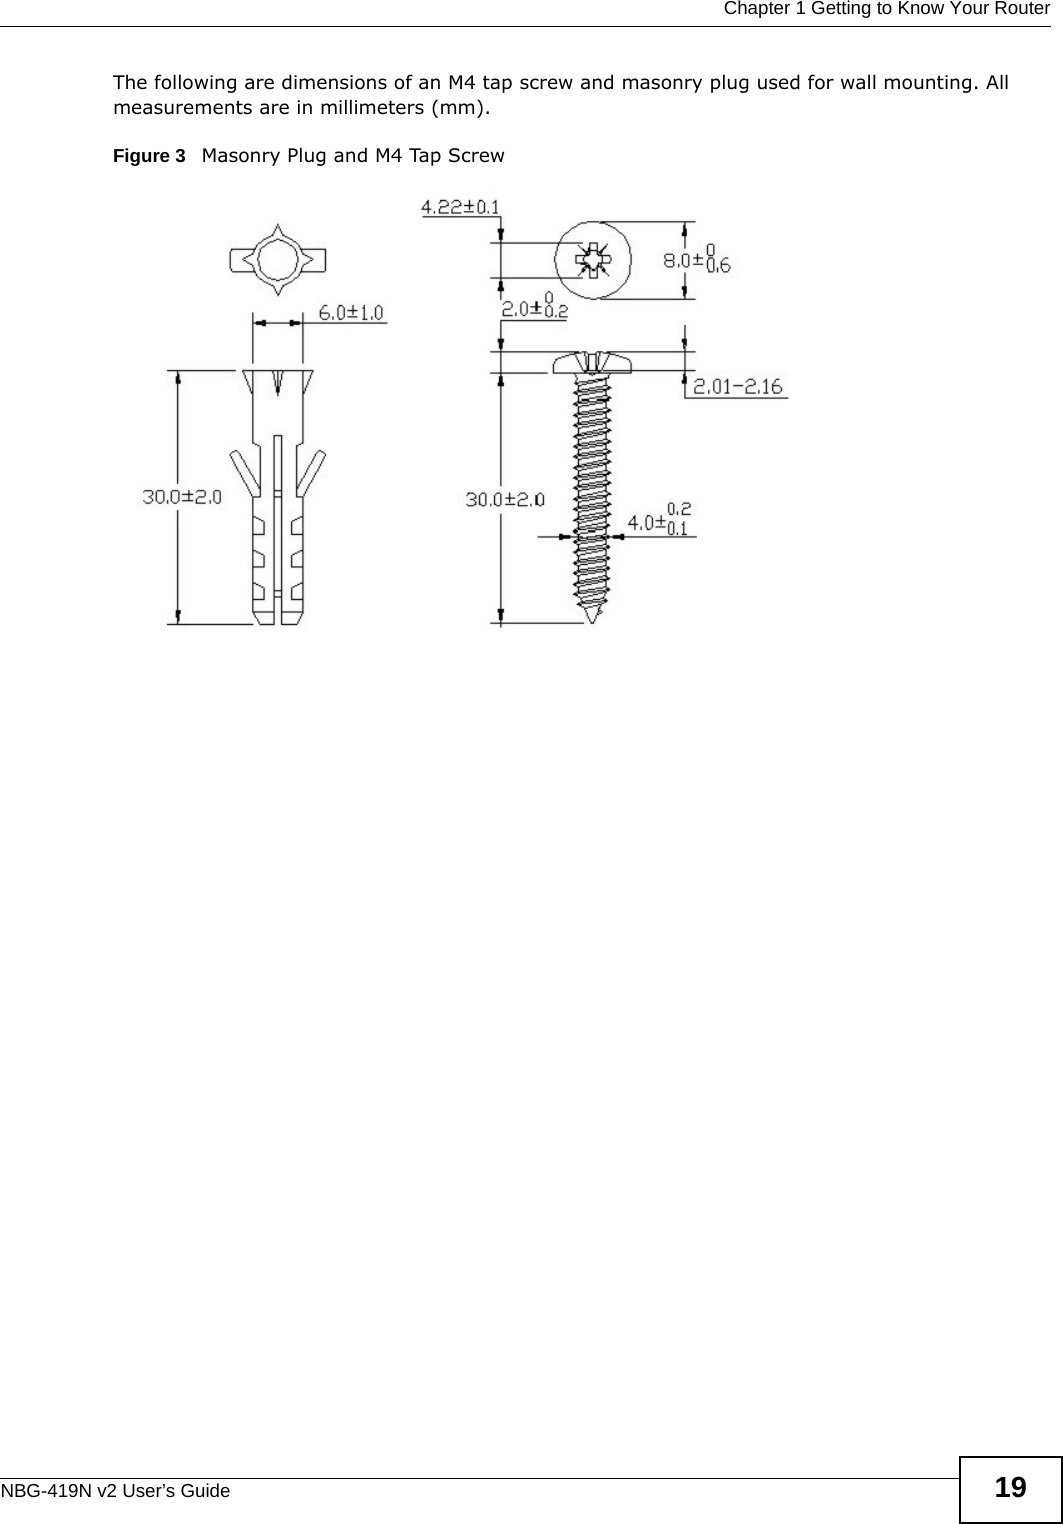  Chapter 1 Getting to Know Your RouterNBG-419N v2 User’s Guide 19The following are dimensions of an M4 tap screw and masonry plug used for wall mounting. All measurements are in millimeters (mm). Figure 3   Masonry Plug and M4 Tap Screw